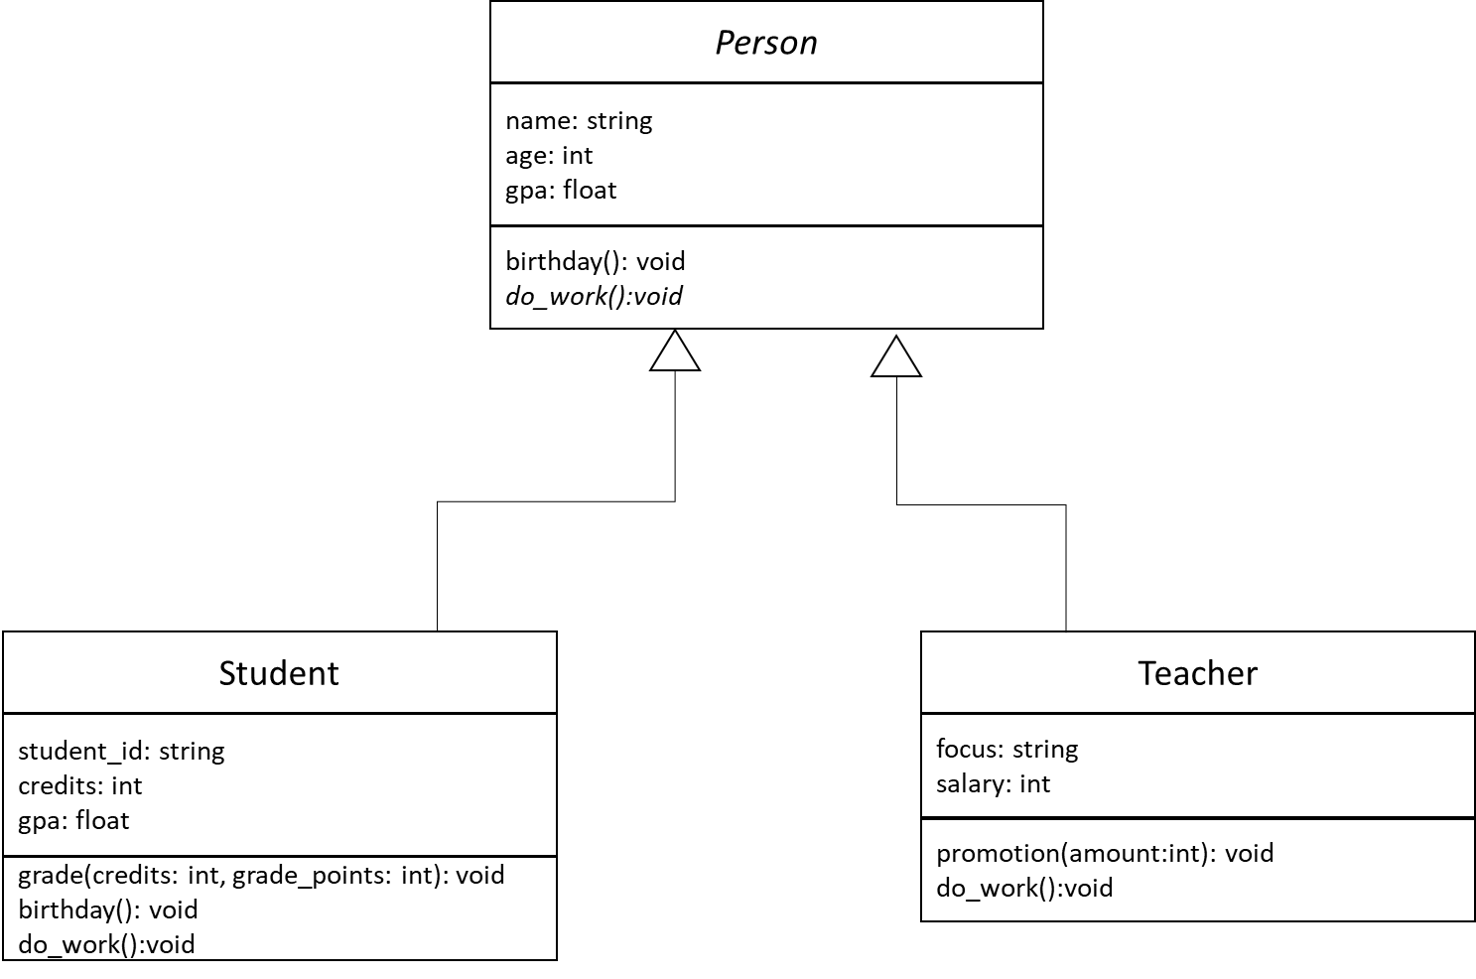 UML Diagram showing Relationship between Student, Person, and Teacher Classes and Overloaded Methods